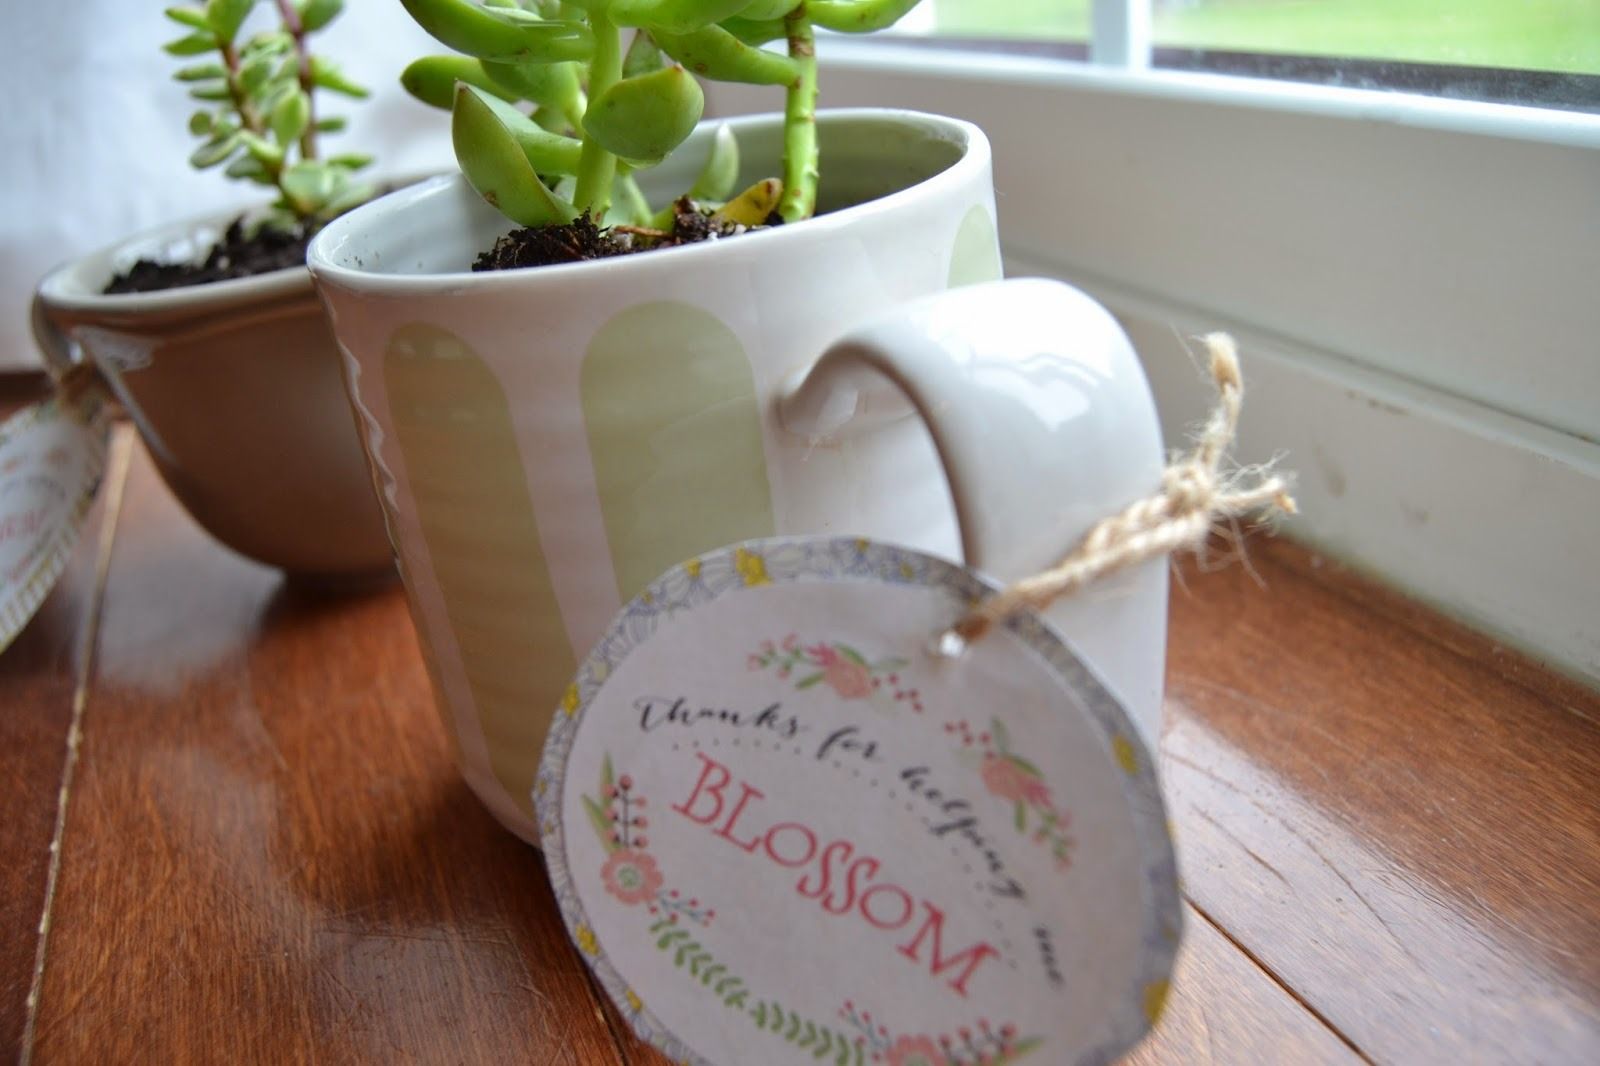 DIY Teacher gifts: A plant in a coffee mug is so clever! Free printable tags at I Heart Naptime